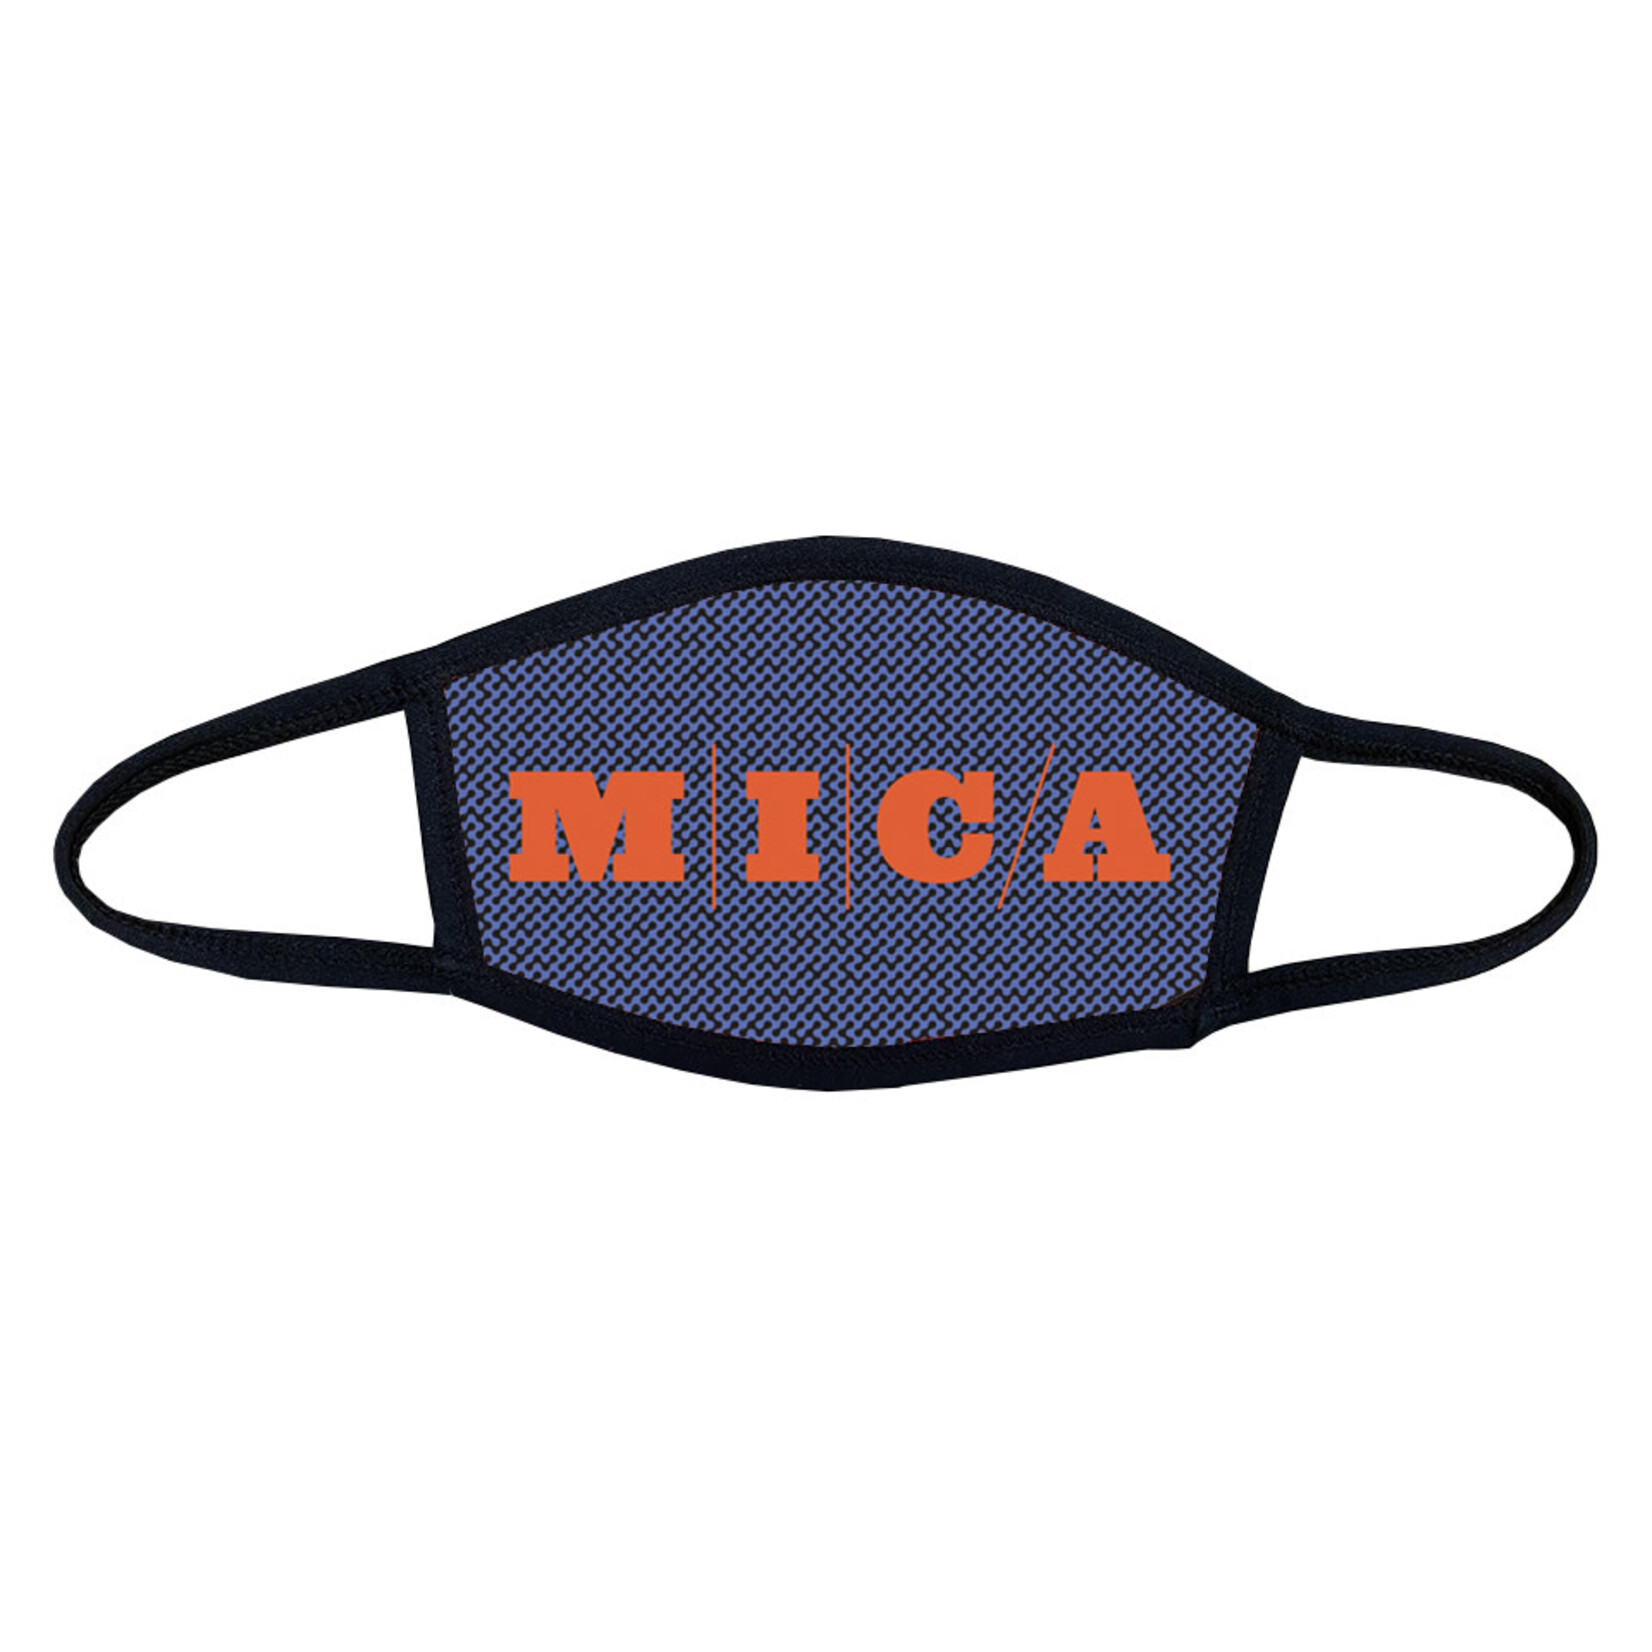 Mica Education - Next Level Learning!